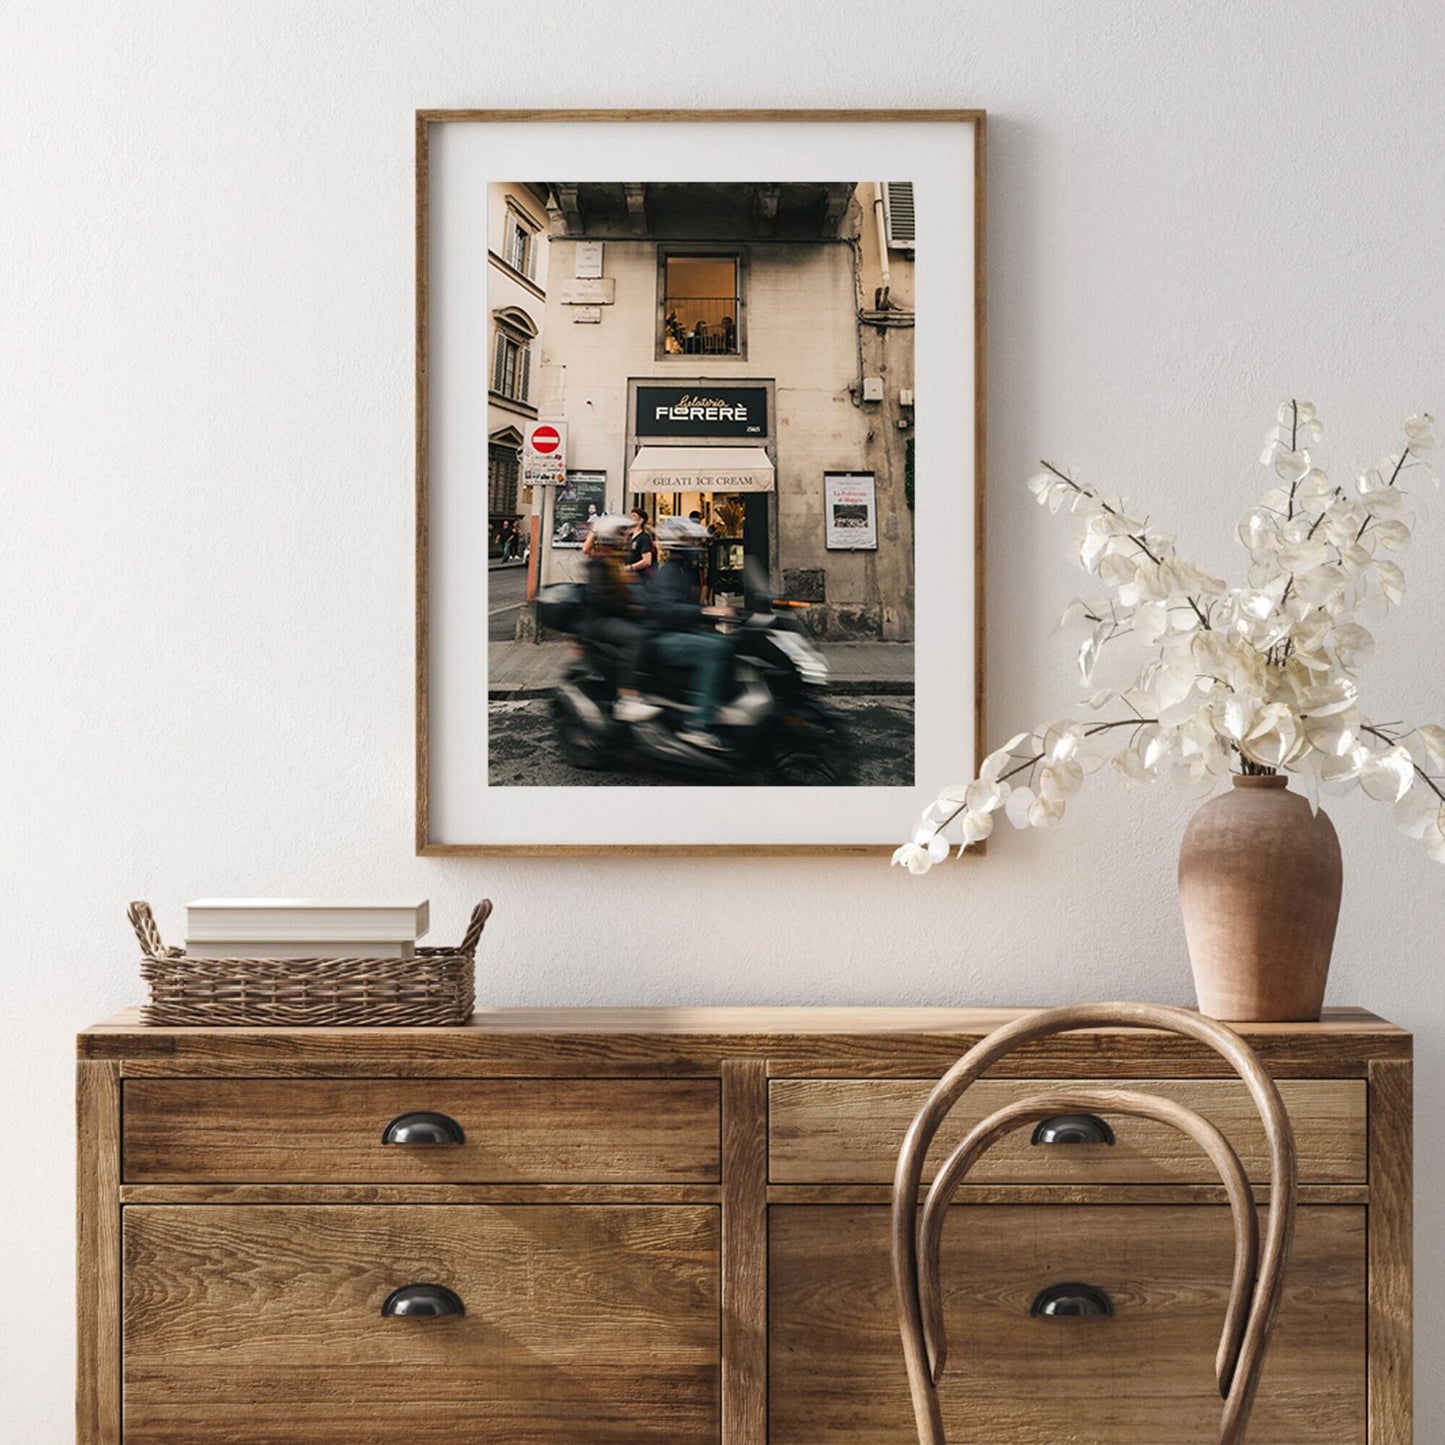 Photography of a motorcycle blurred with speed on the streets of Florence, Italy against a wooden home decor.